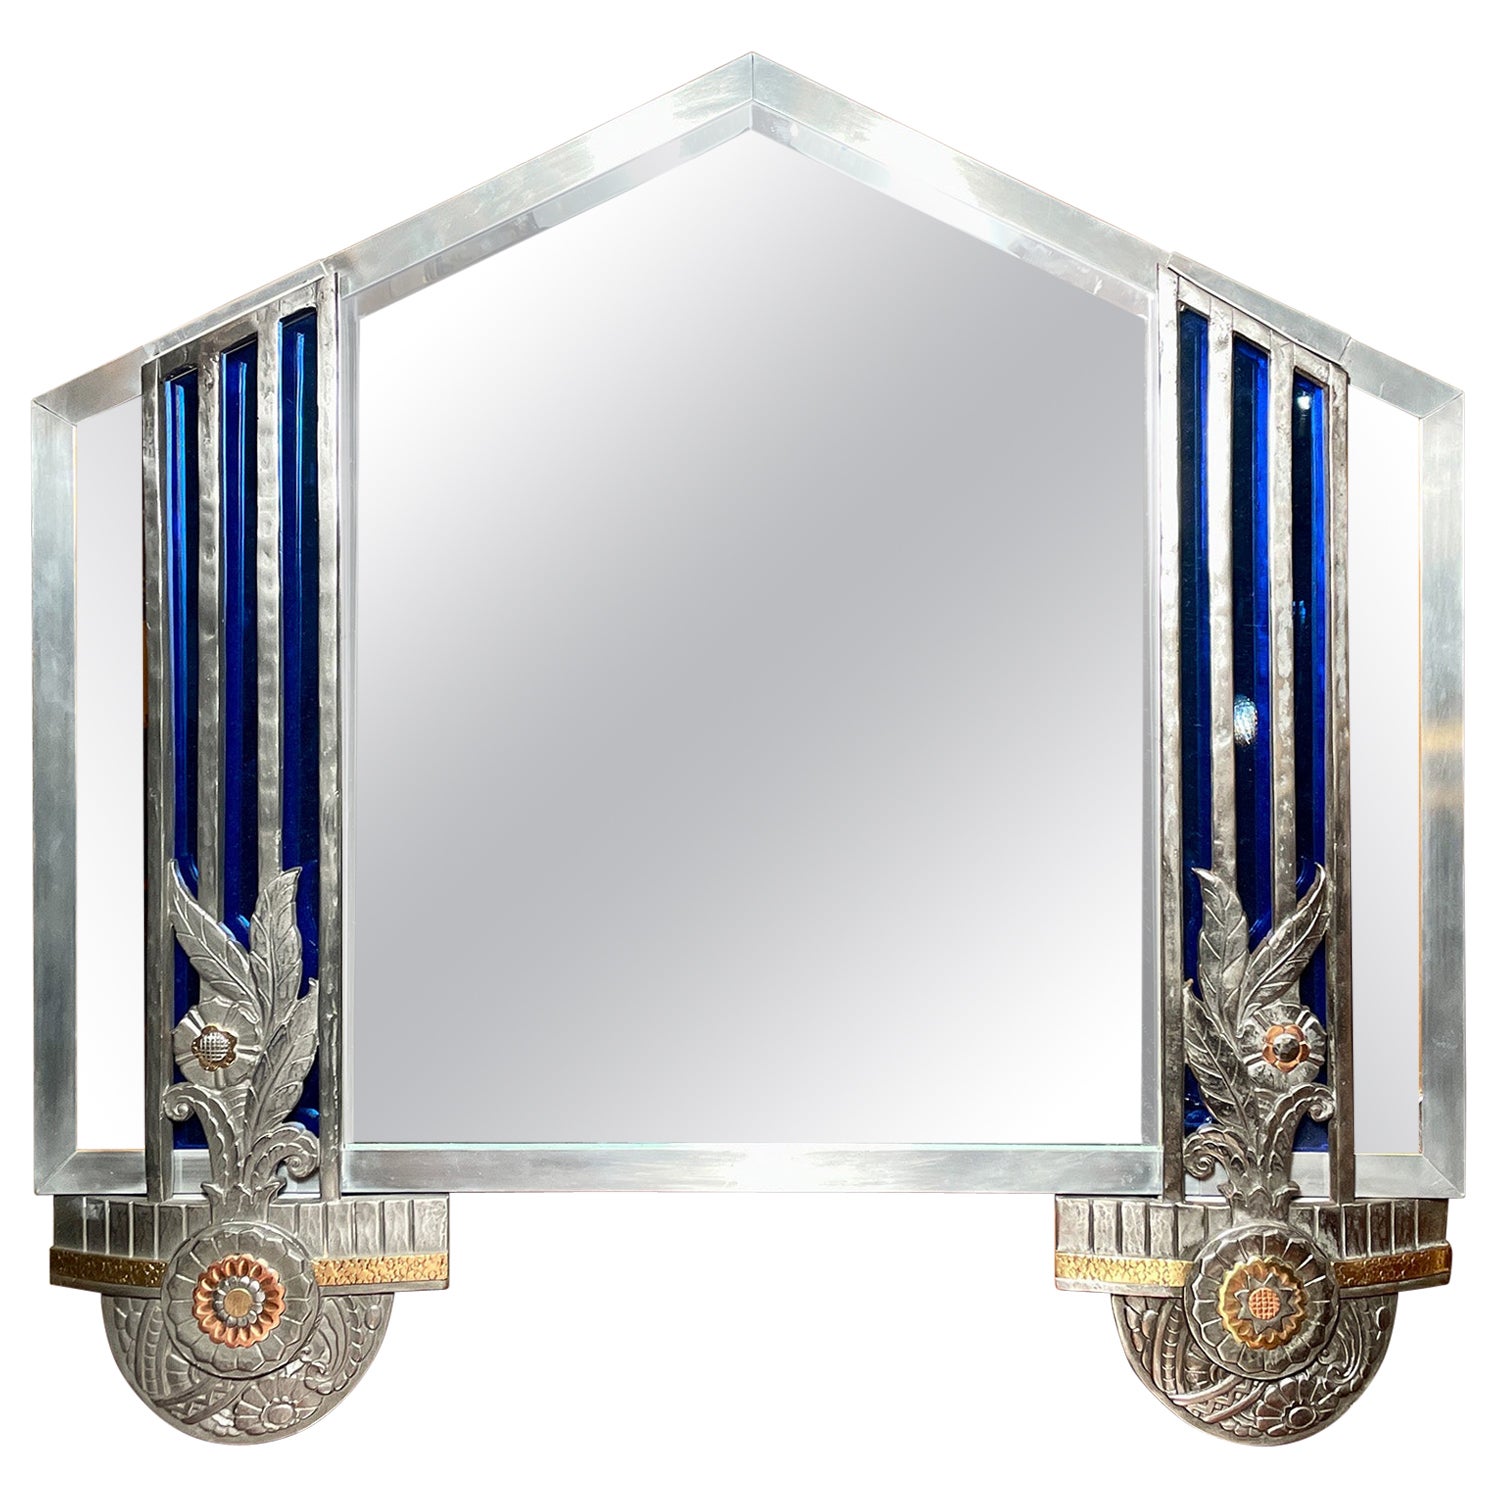 Estate Art Deco Mid-20th Century Steel and Cobalt Glass Mirror For Sale